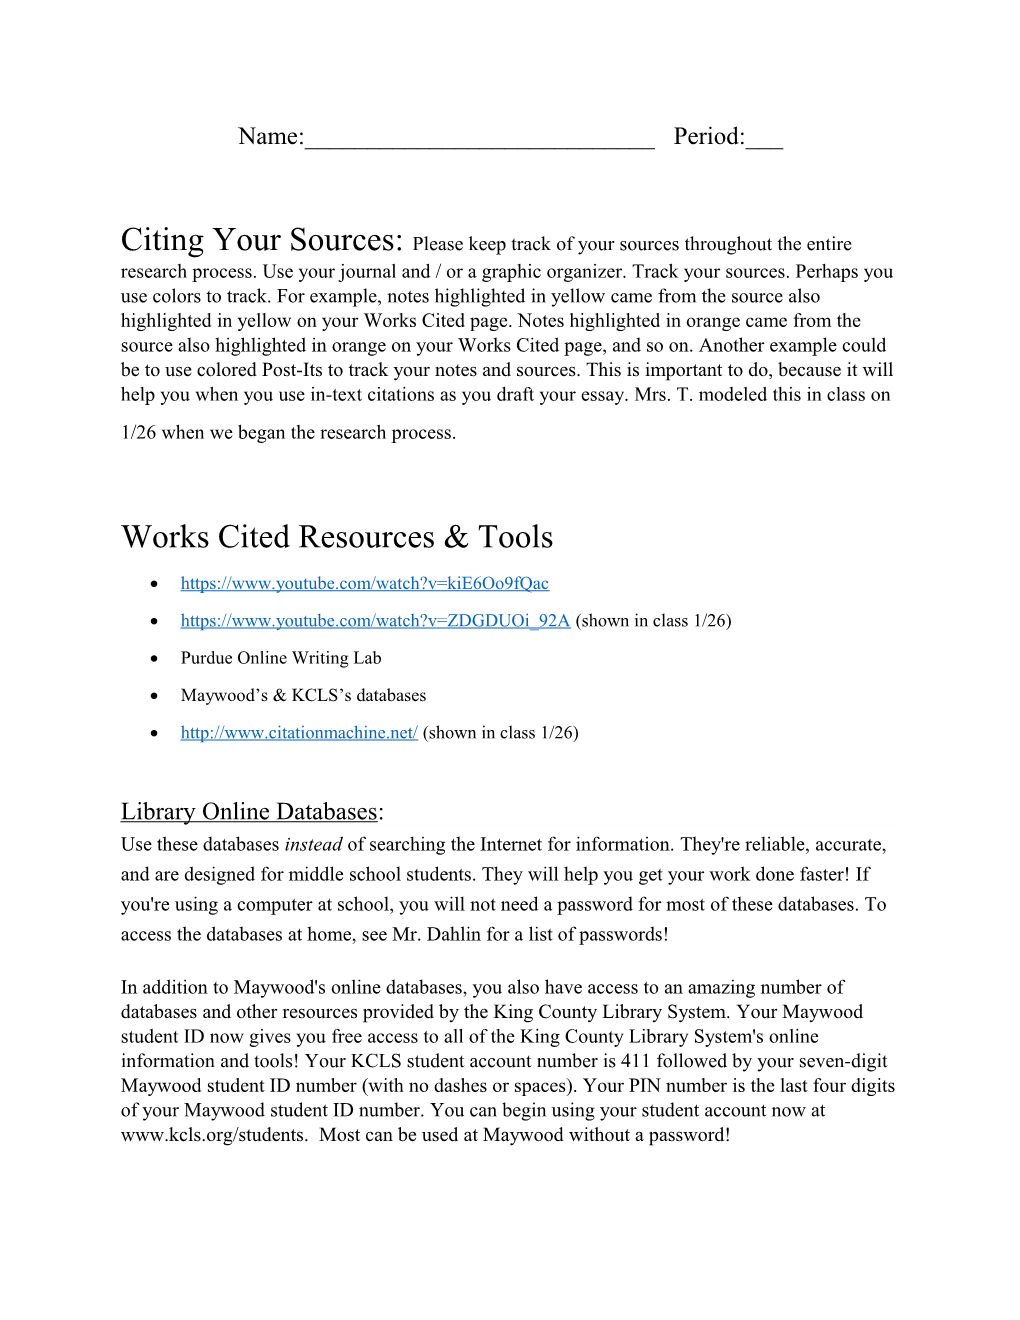 Works Cited Resources & Tools